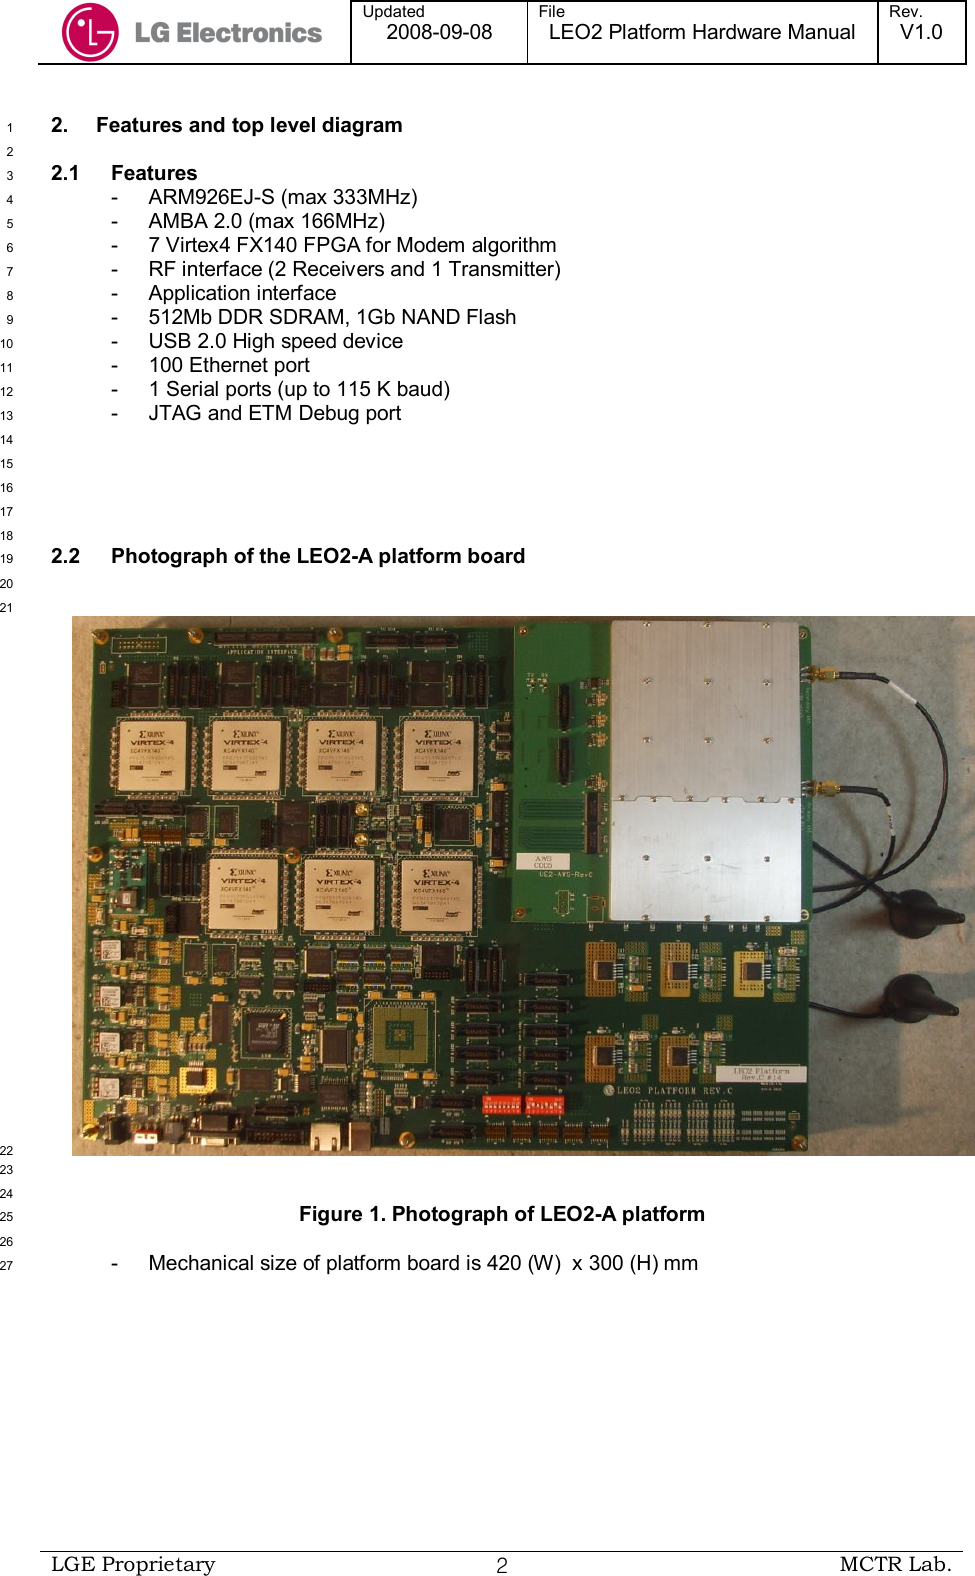  Updated 2008-09-08 File LEO2 Platform Hardware Manual Rev. V1.0   LGE Proprietary  ２ MCTR Lab.  2.  Features and top level diagram 1  2 2.1  Features 3 -  ARM926EJ-S (max 333MHz) 4 -  AMBA 2.0 (max 166MHz) 5 -  7 Virtex4 FX140 FPGA for Modem algorithm  6 -  RF interface (2 Receivers and 1 Transmitter) 7 -  Application interface 8 -  512Mb DDR SDRAM, 1Gb NAND Flash 9 -  USB 2.0 High speed device 10 -  100 Ethernet port 11 -  1 Serial ports (up to 115 K baud) 12 -  JTAG and ETM Debug port 13  14  15  16  17  18 2.2  Photograph of the LEO2-A platform board 19  20  21  22  23  24 Figure 1. Photograph of LEO2-A platform 25  26 -  Mechanical size of platform board is 420 (W)  x 300 (H) mm 27 